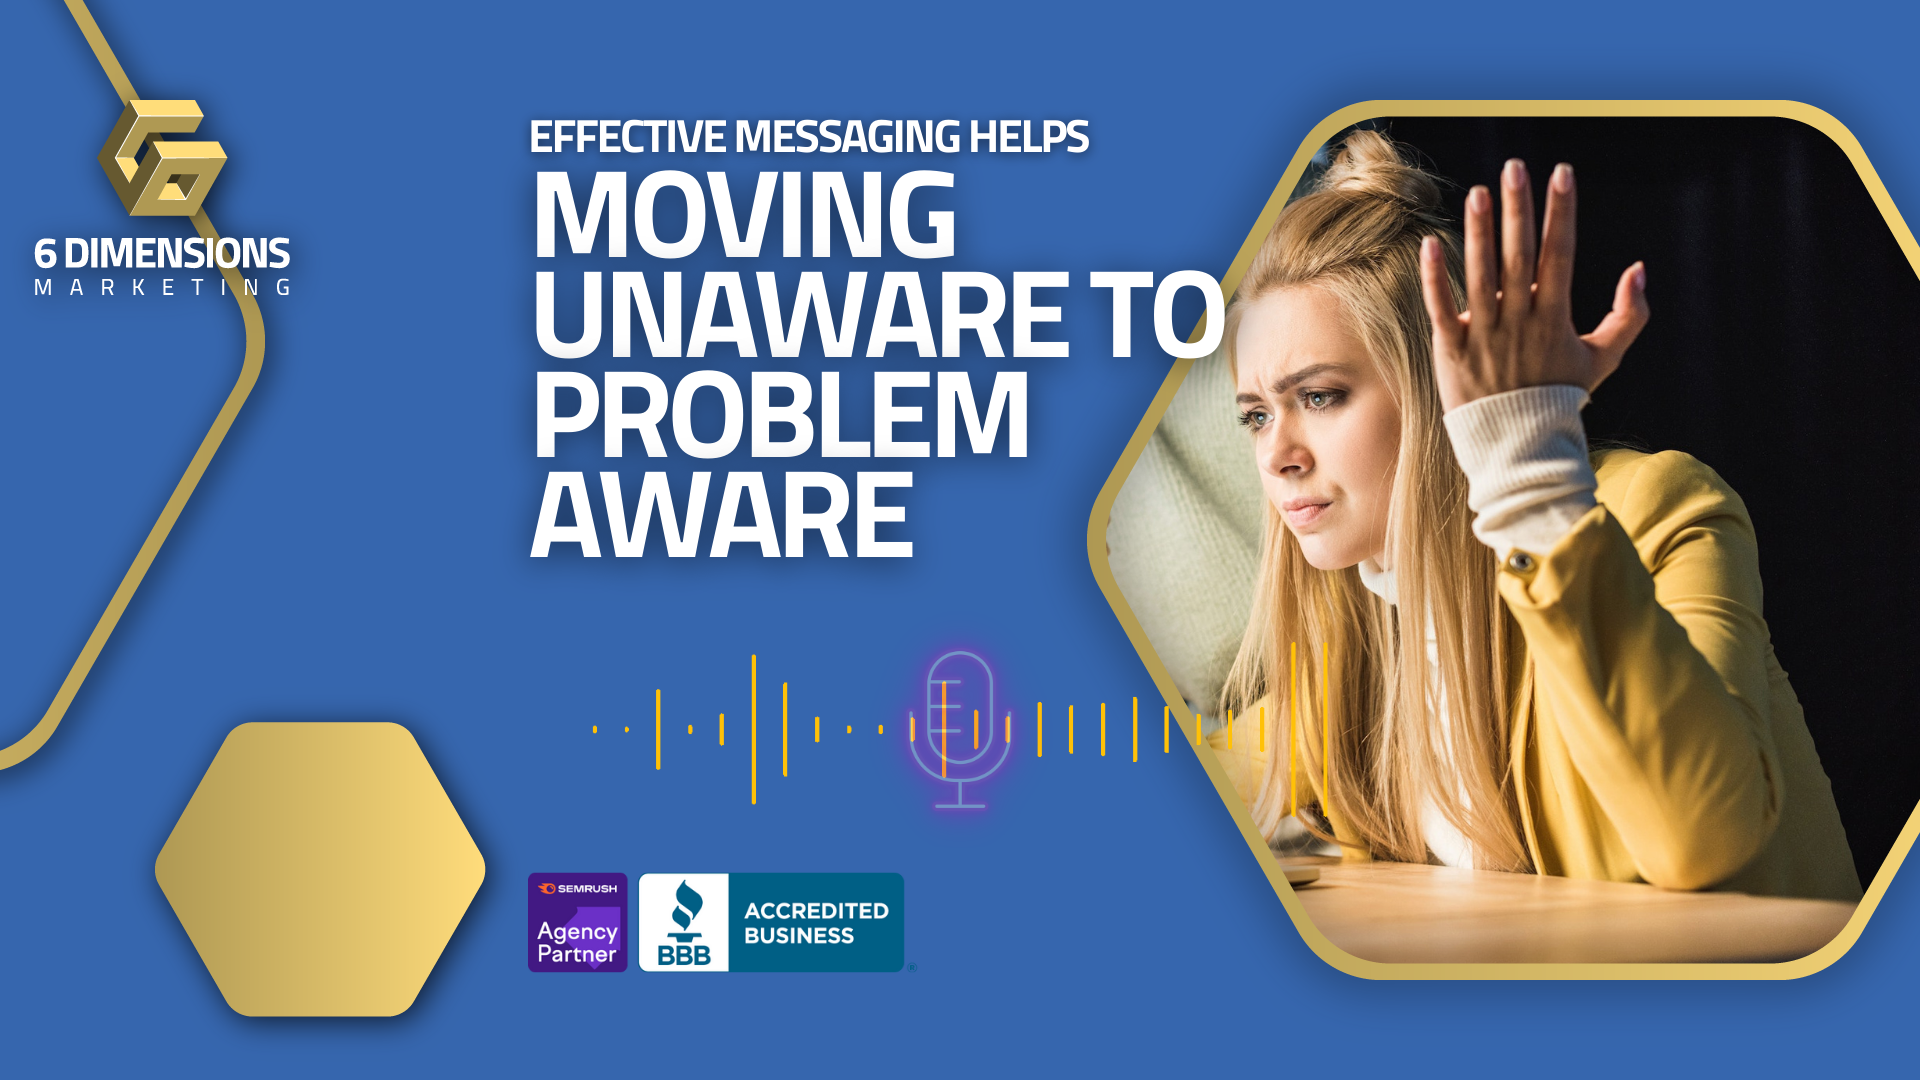 Effective Messaging Helps Moving Unaware to Problem Aware